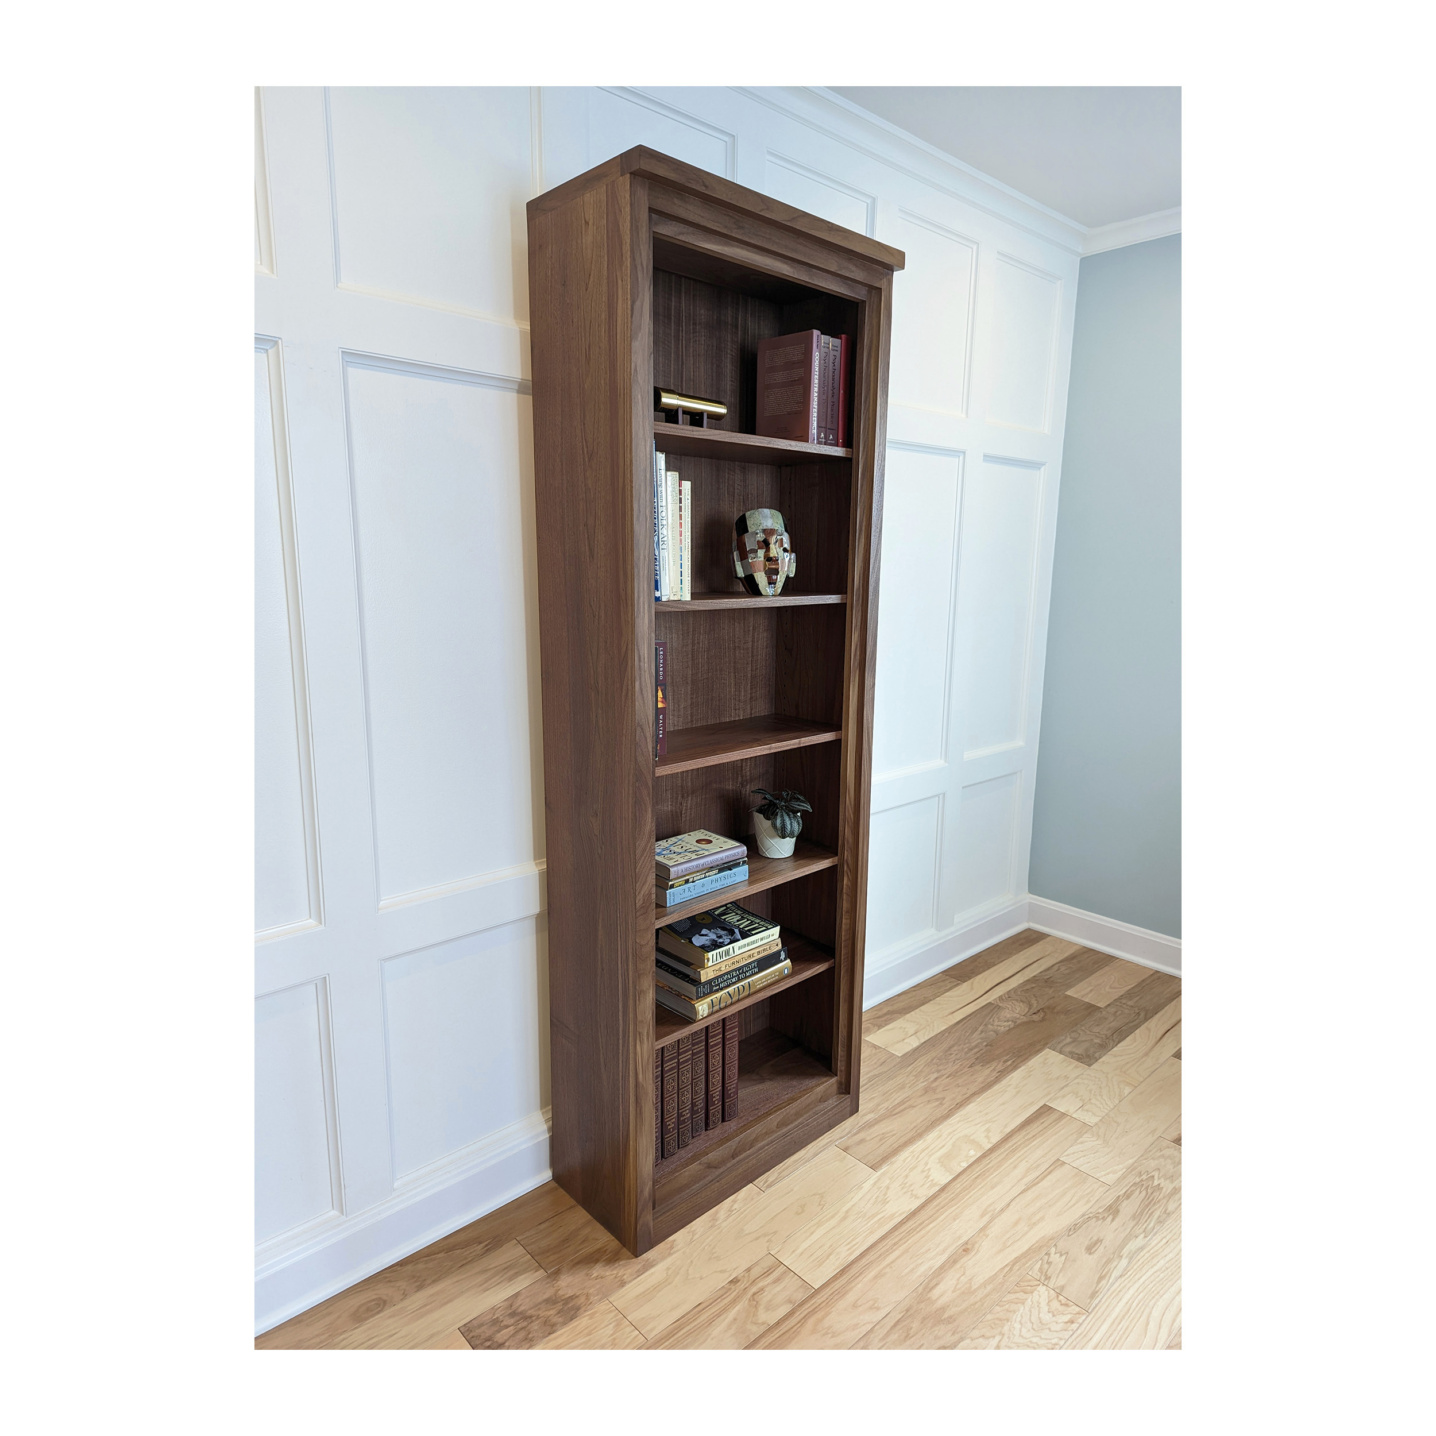 Walnut Bookcase--the bookcase has a modern design with adjustable shelves--Made by 57NorthPlank Tailored Fine Furniture